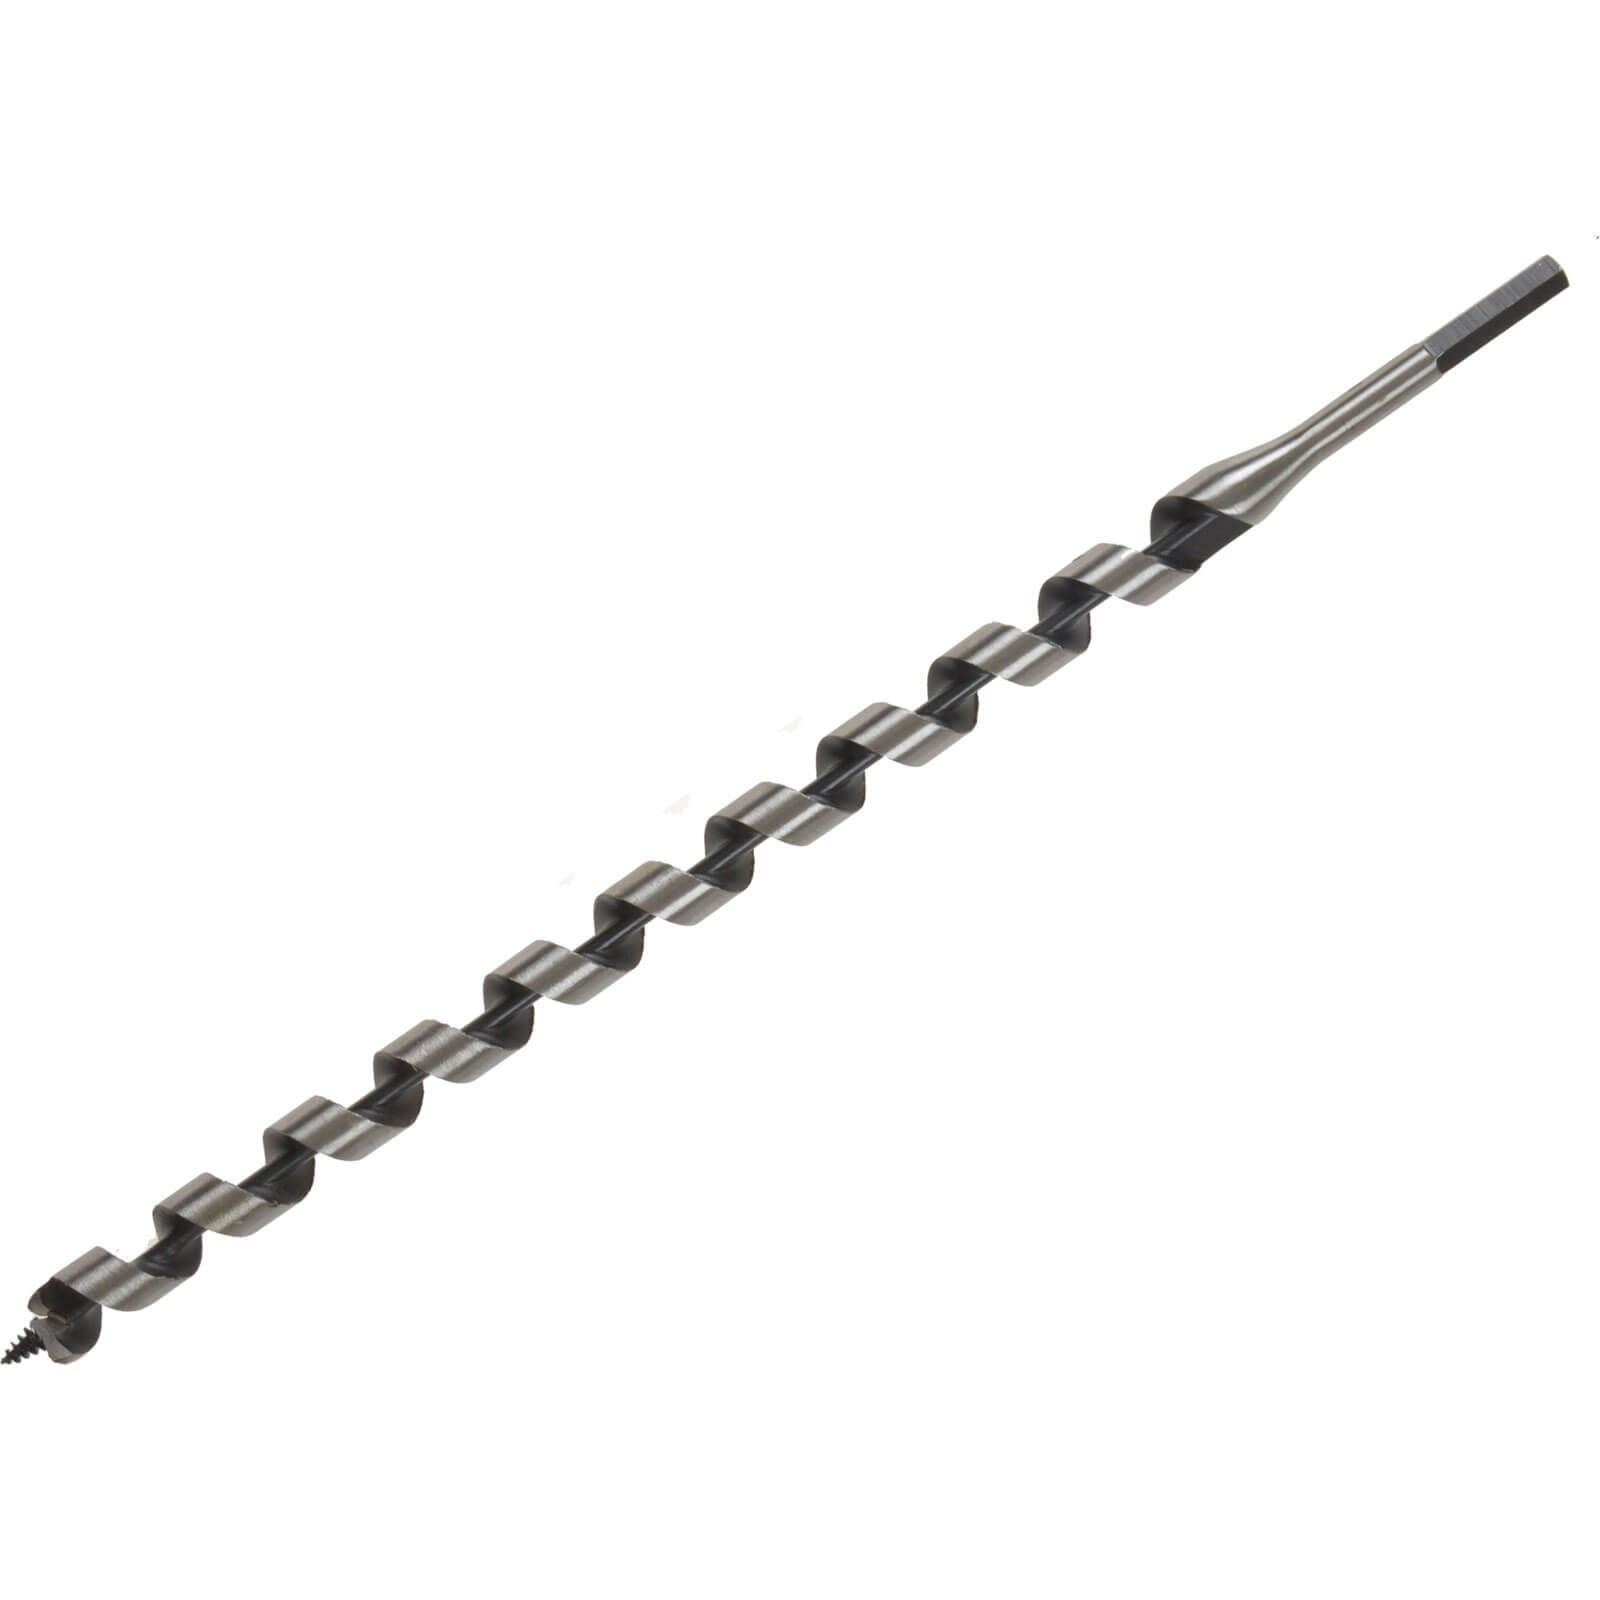 Image of Irwin Wood Auger Drill Bit 10mm 400mm